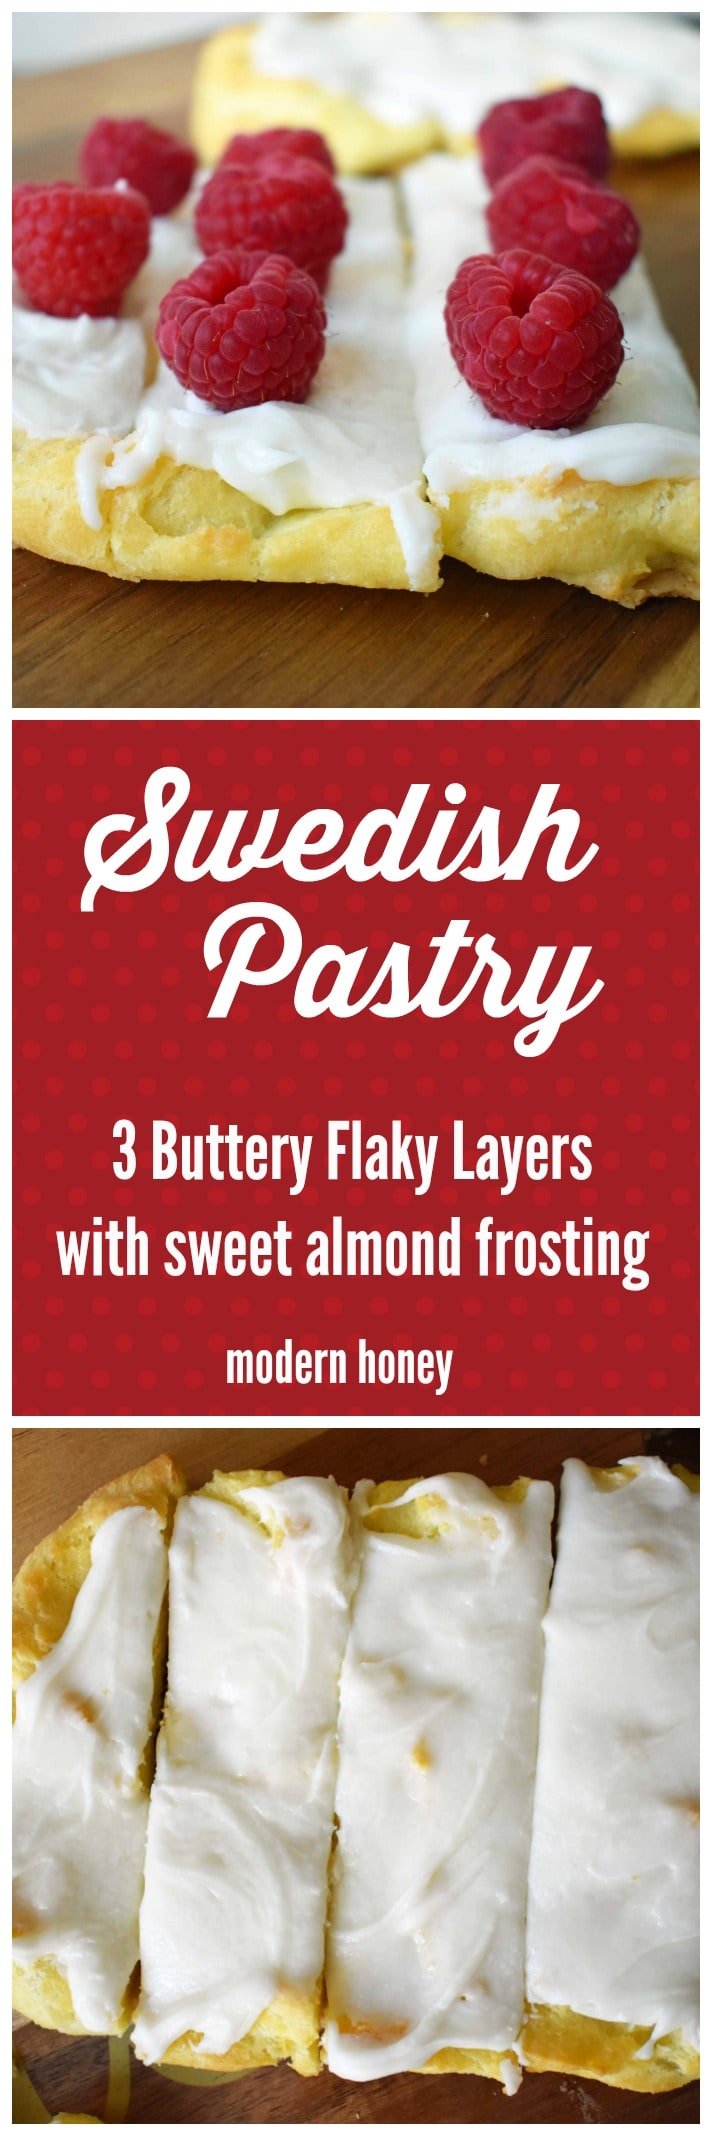 Swedish Pastry by Modern Honey. Buttery flaky layers with almond filling and topped with sweet cream frosting. A popular homemade European pastry.